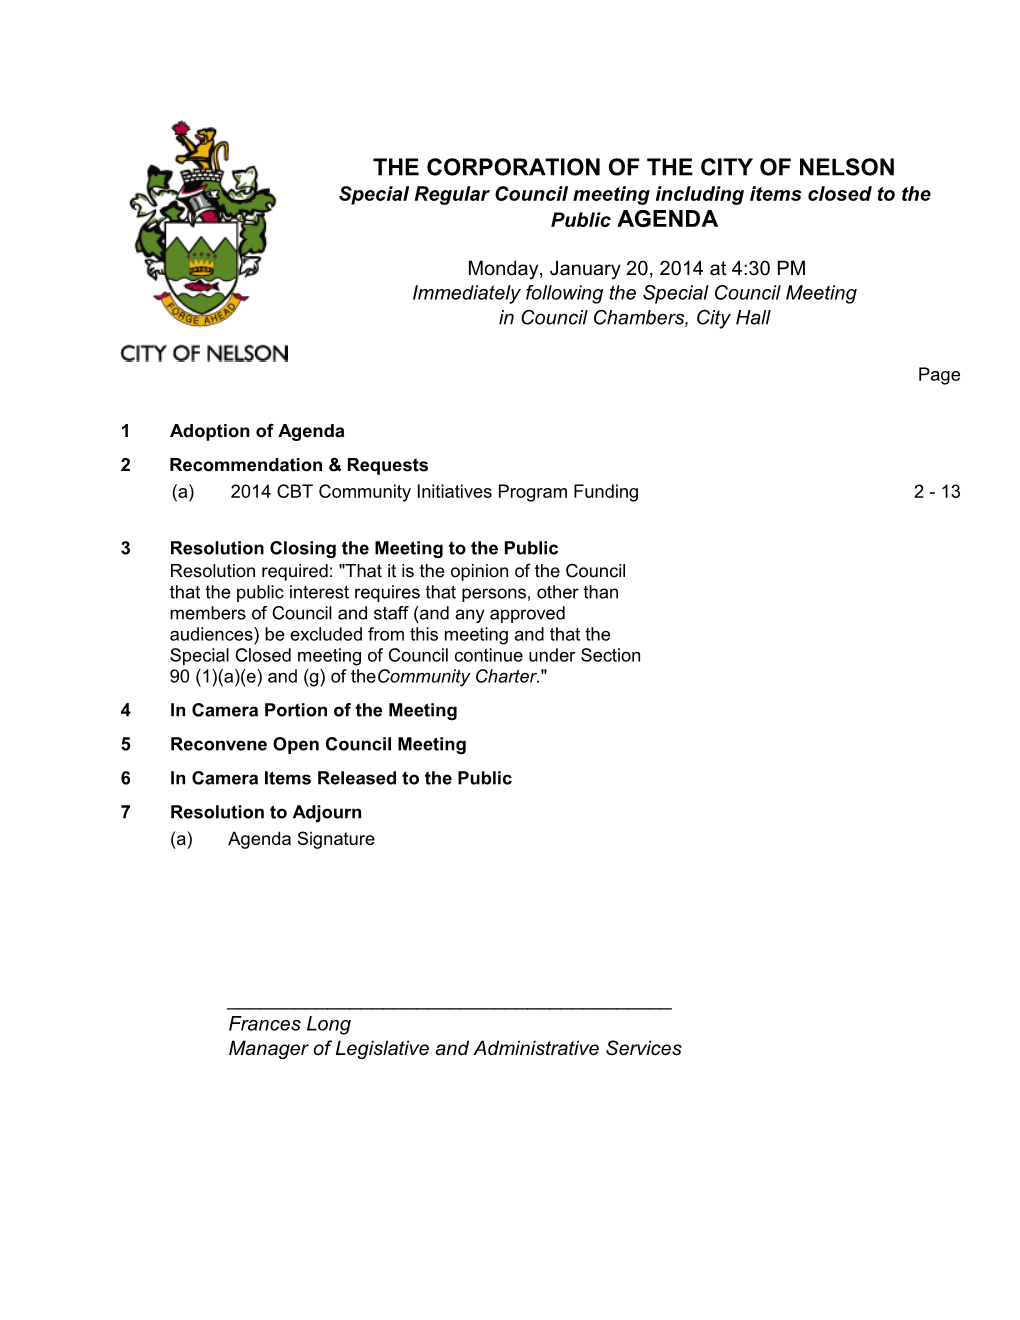 THE CORPORATION of the CITY of NELSON Special Regular Council Meeting Including Items Closed to the Public AGENDA